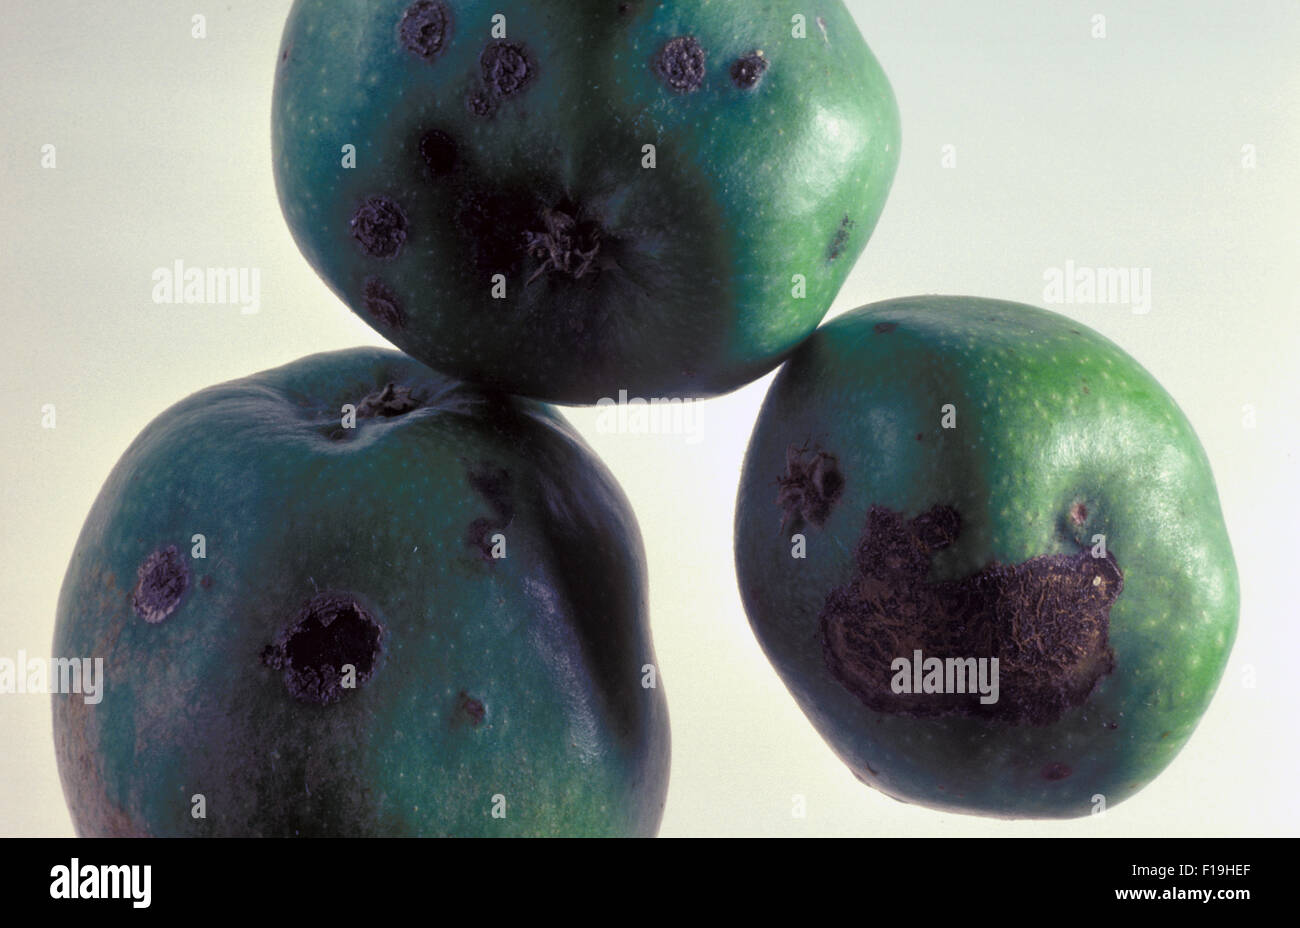 APPLE SCAB (VENTURIA INAEQUALIS) ALSO KNOWN AS BLACK SPOT Stock Photo